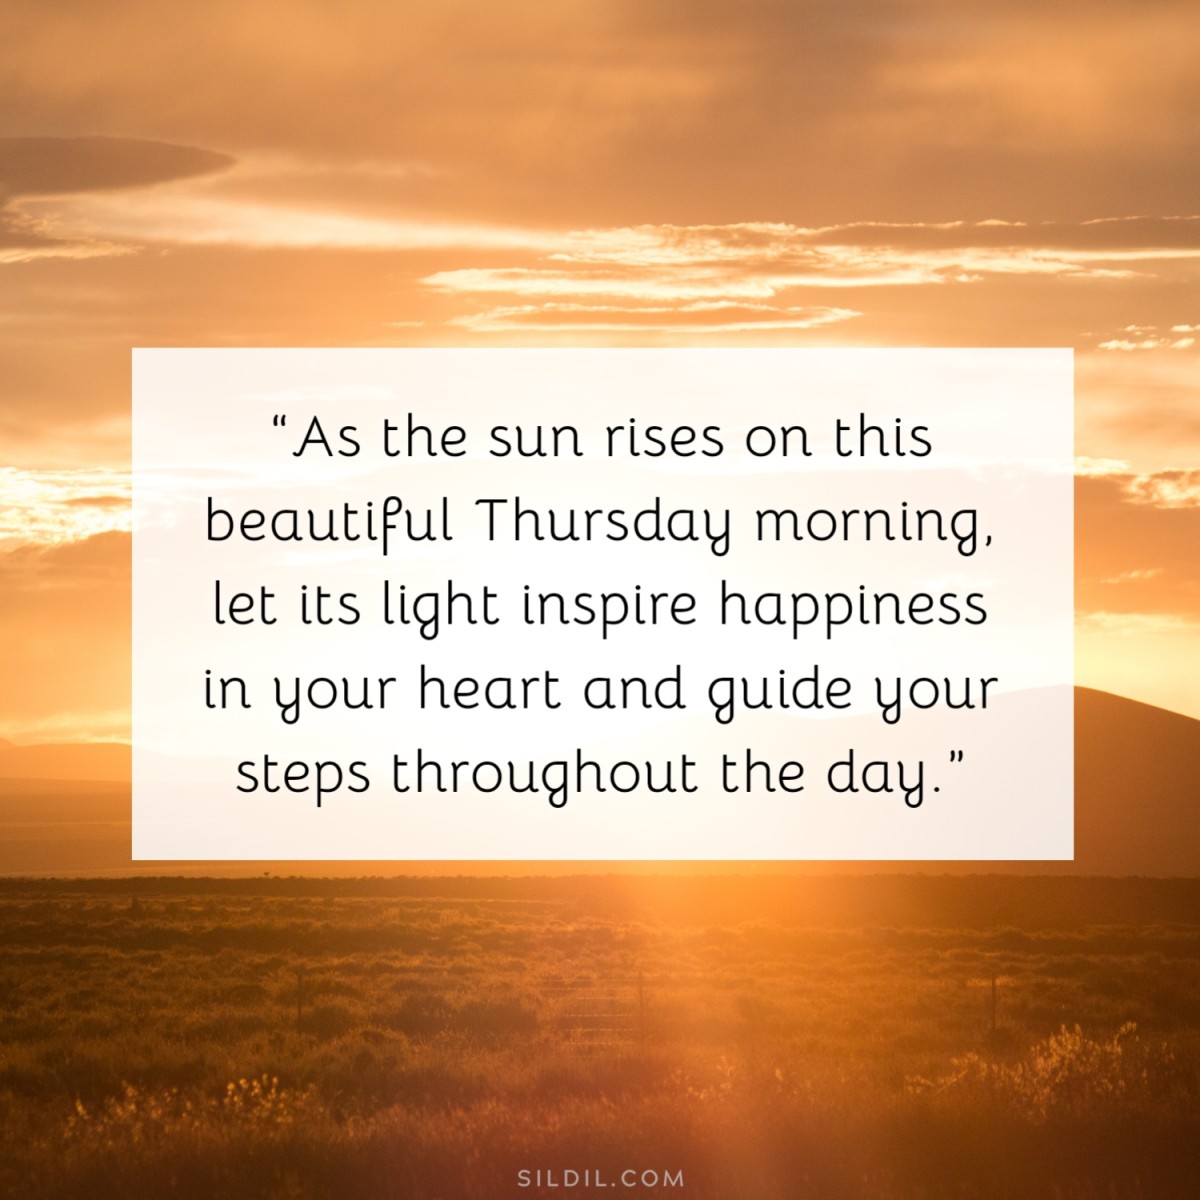 “As the sun rises on this beautiful Thursday morning, let its light inspire happiness in your heart and guide your steps throughout the day.”